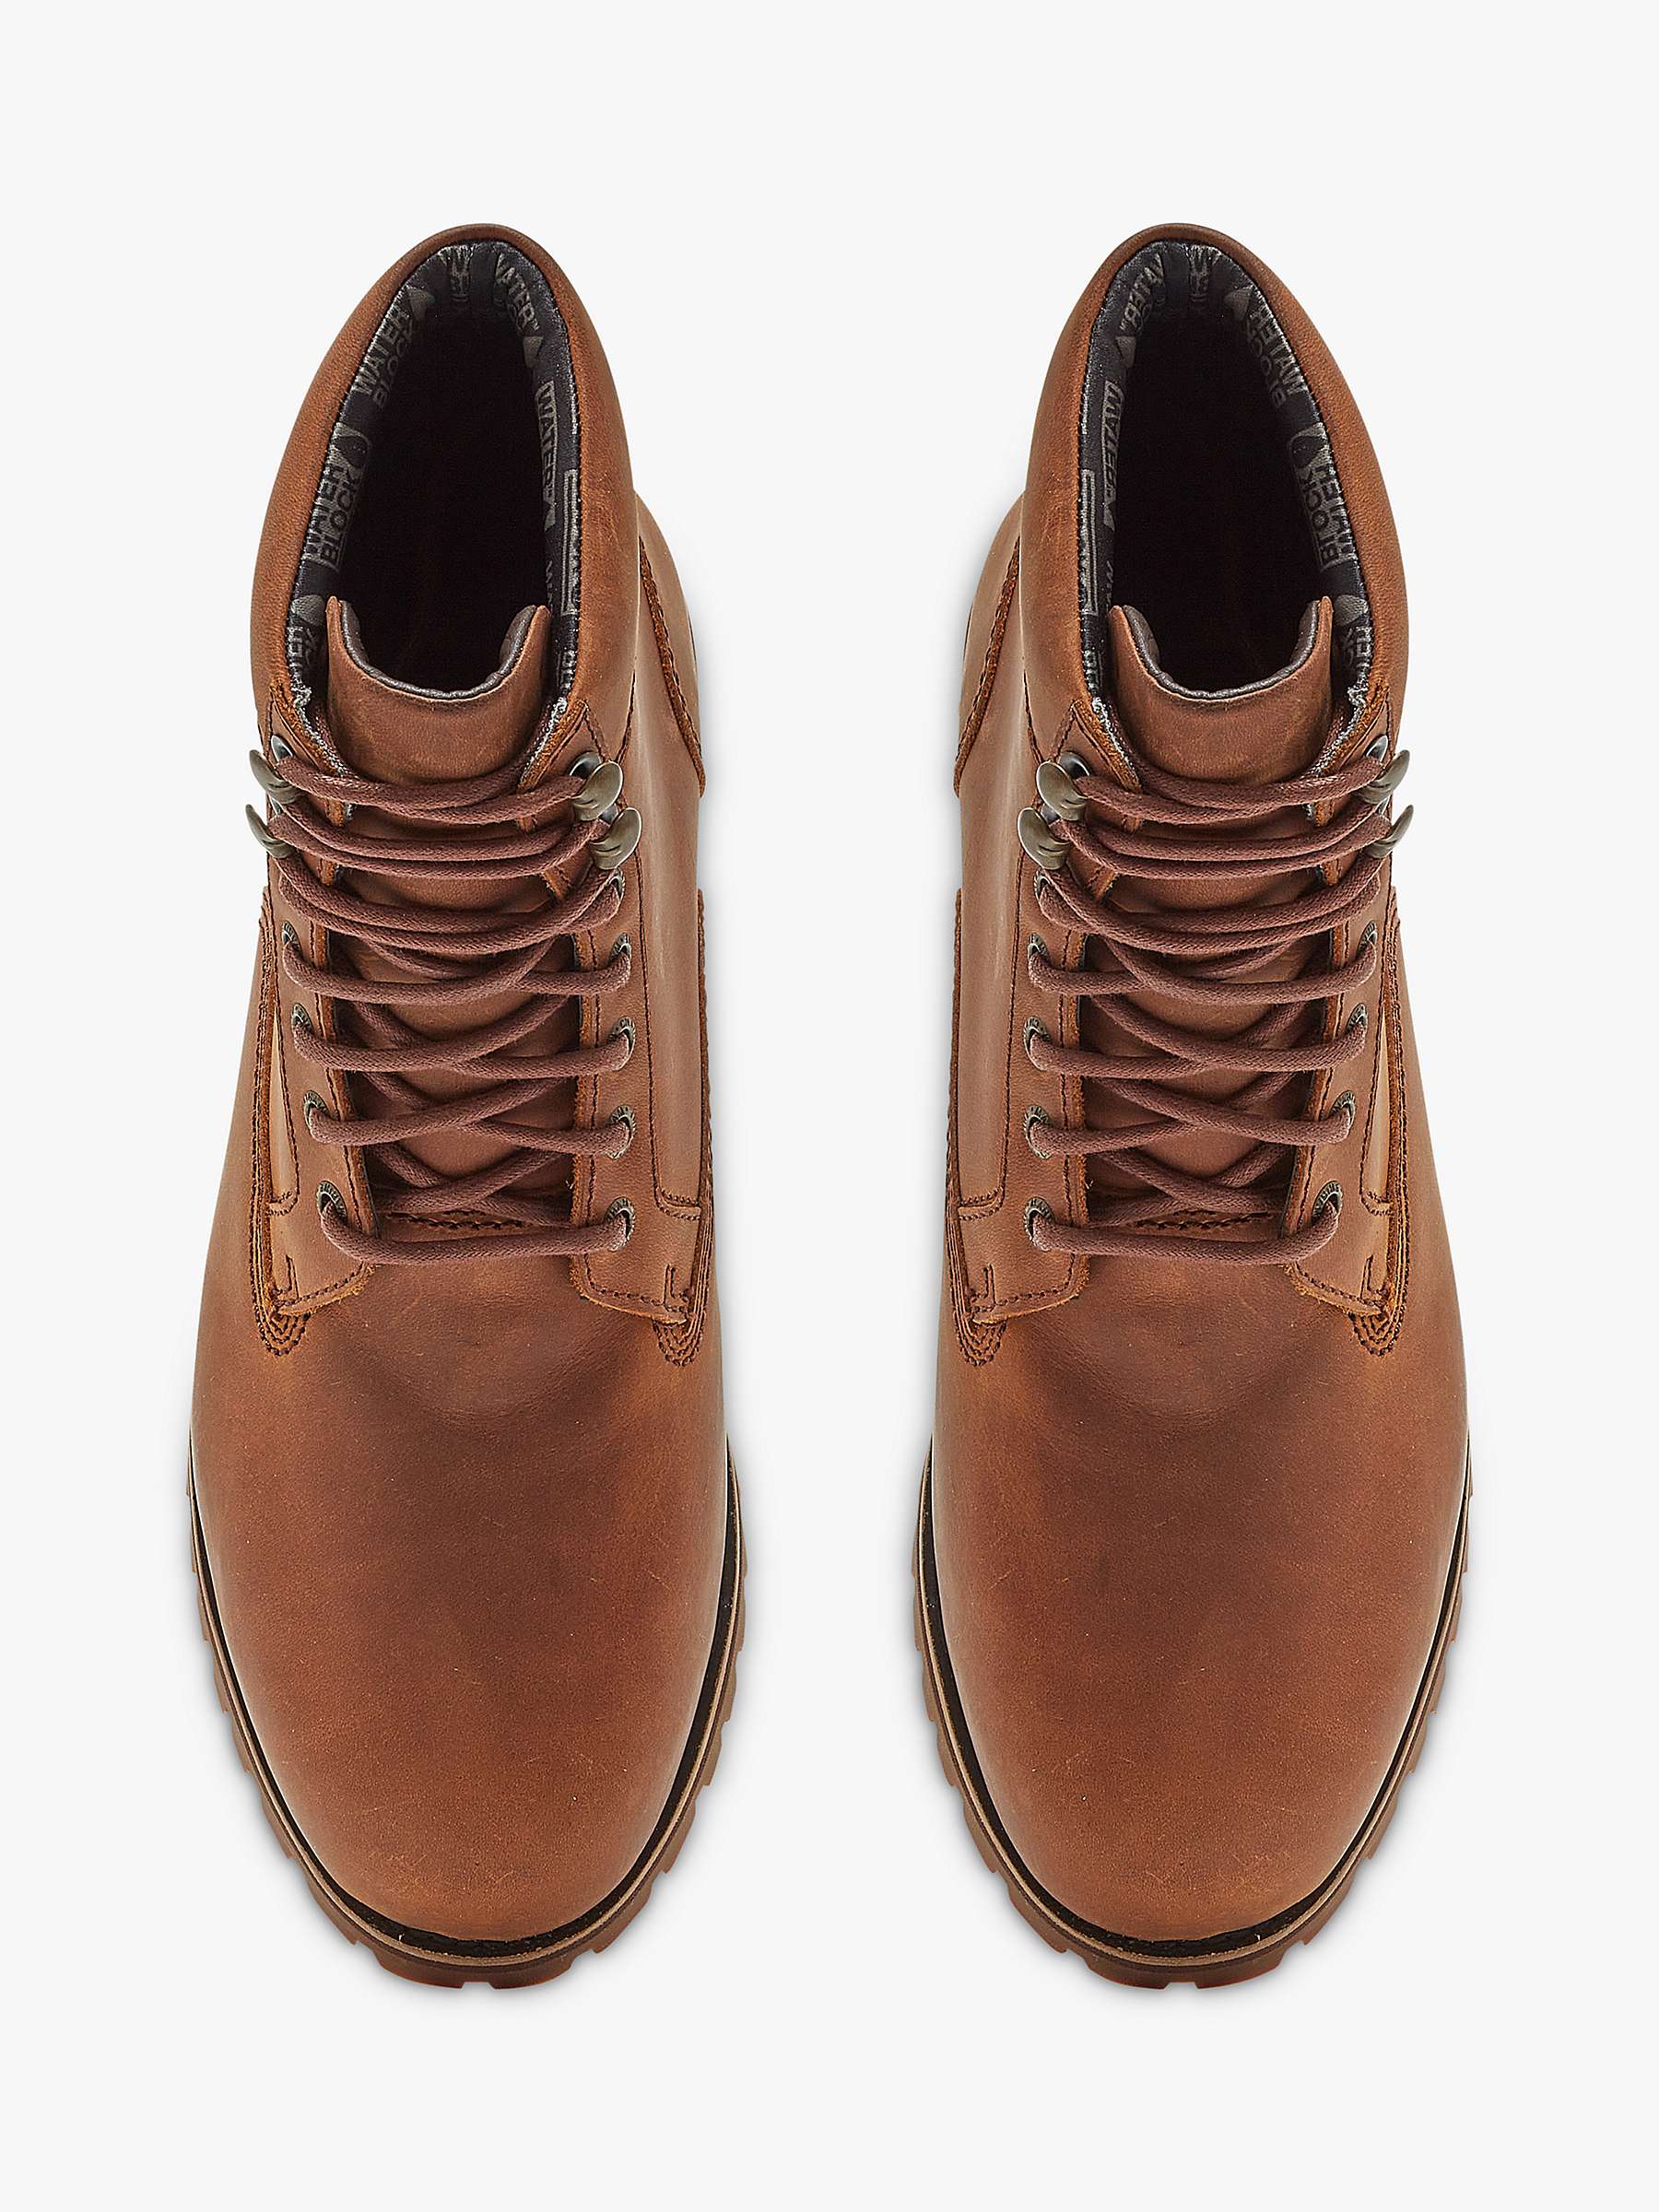 Buy Chatham Standen Leather Ankle Boots, Walnut Online at johnlewis.com